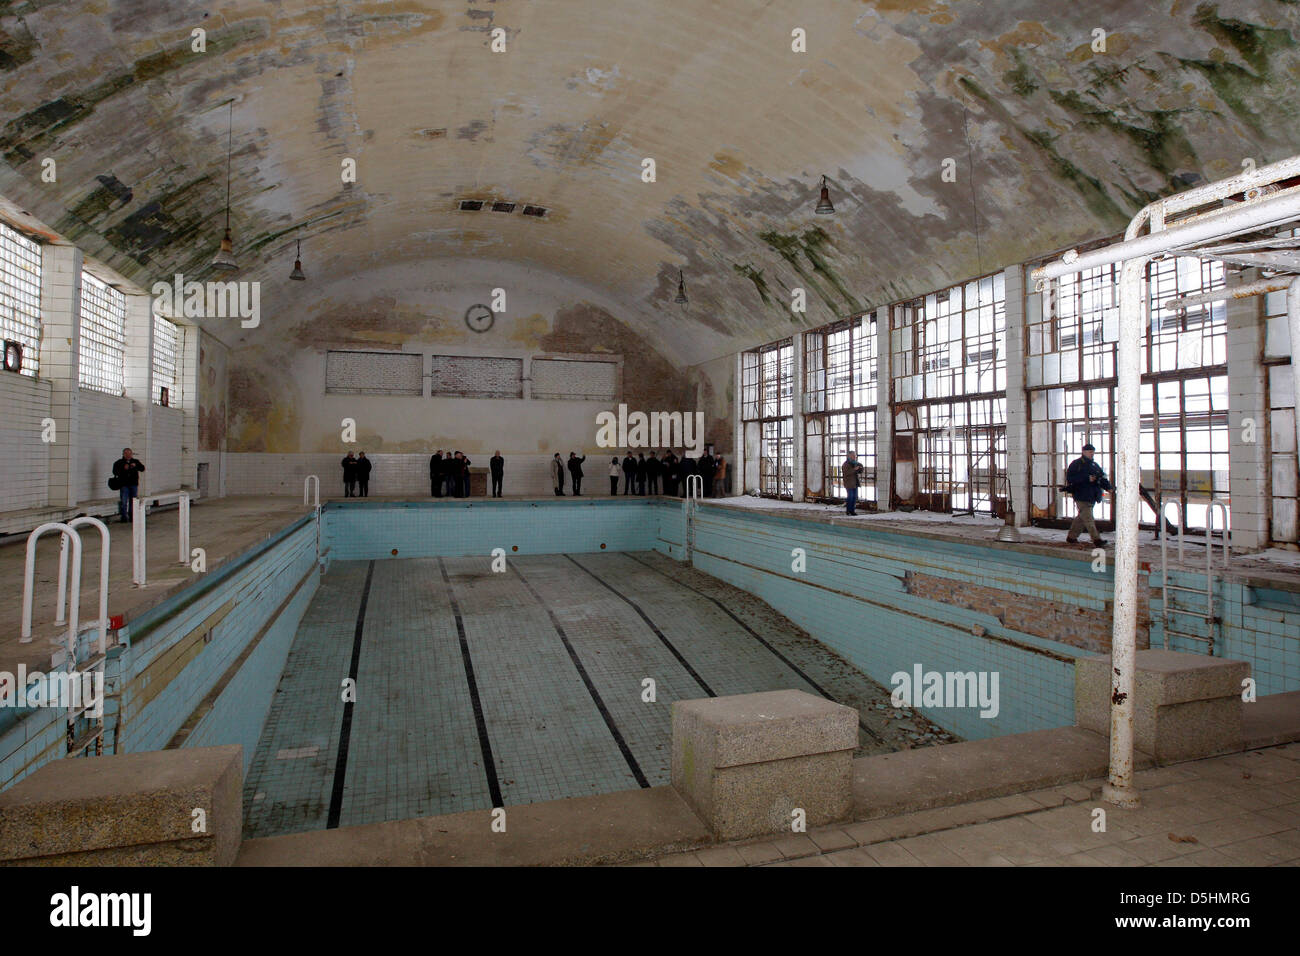 View into the former swimming hall of the Berlin 1936 Summer Olympics in Elstal, Gerany, 19 February 2010. The swimming hall was exposed to the elements after an arson attack in 1993. It is to be restored with federal and regional means. Photo: NESTOR BACHMANN Stock Photo